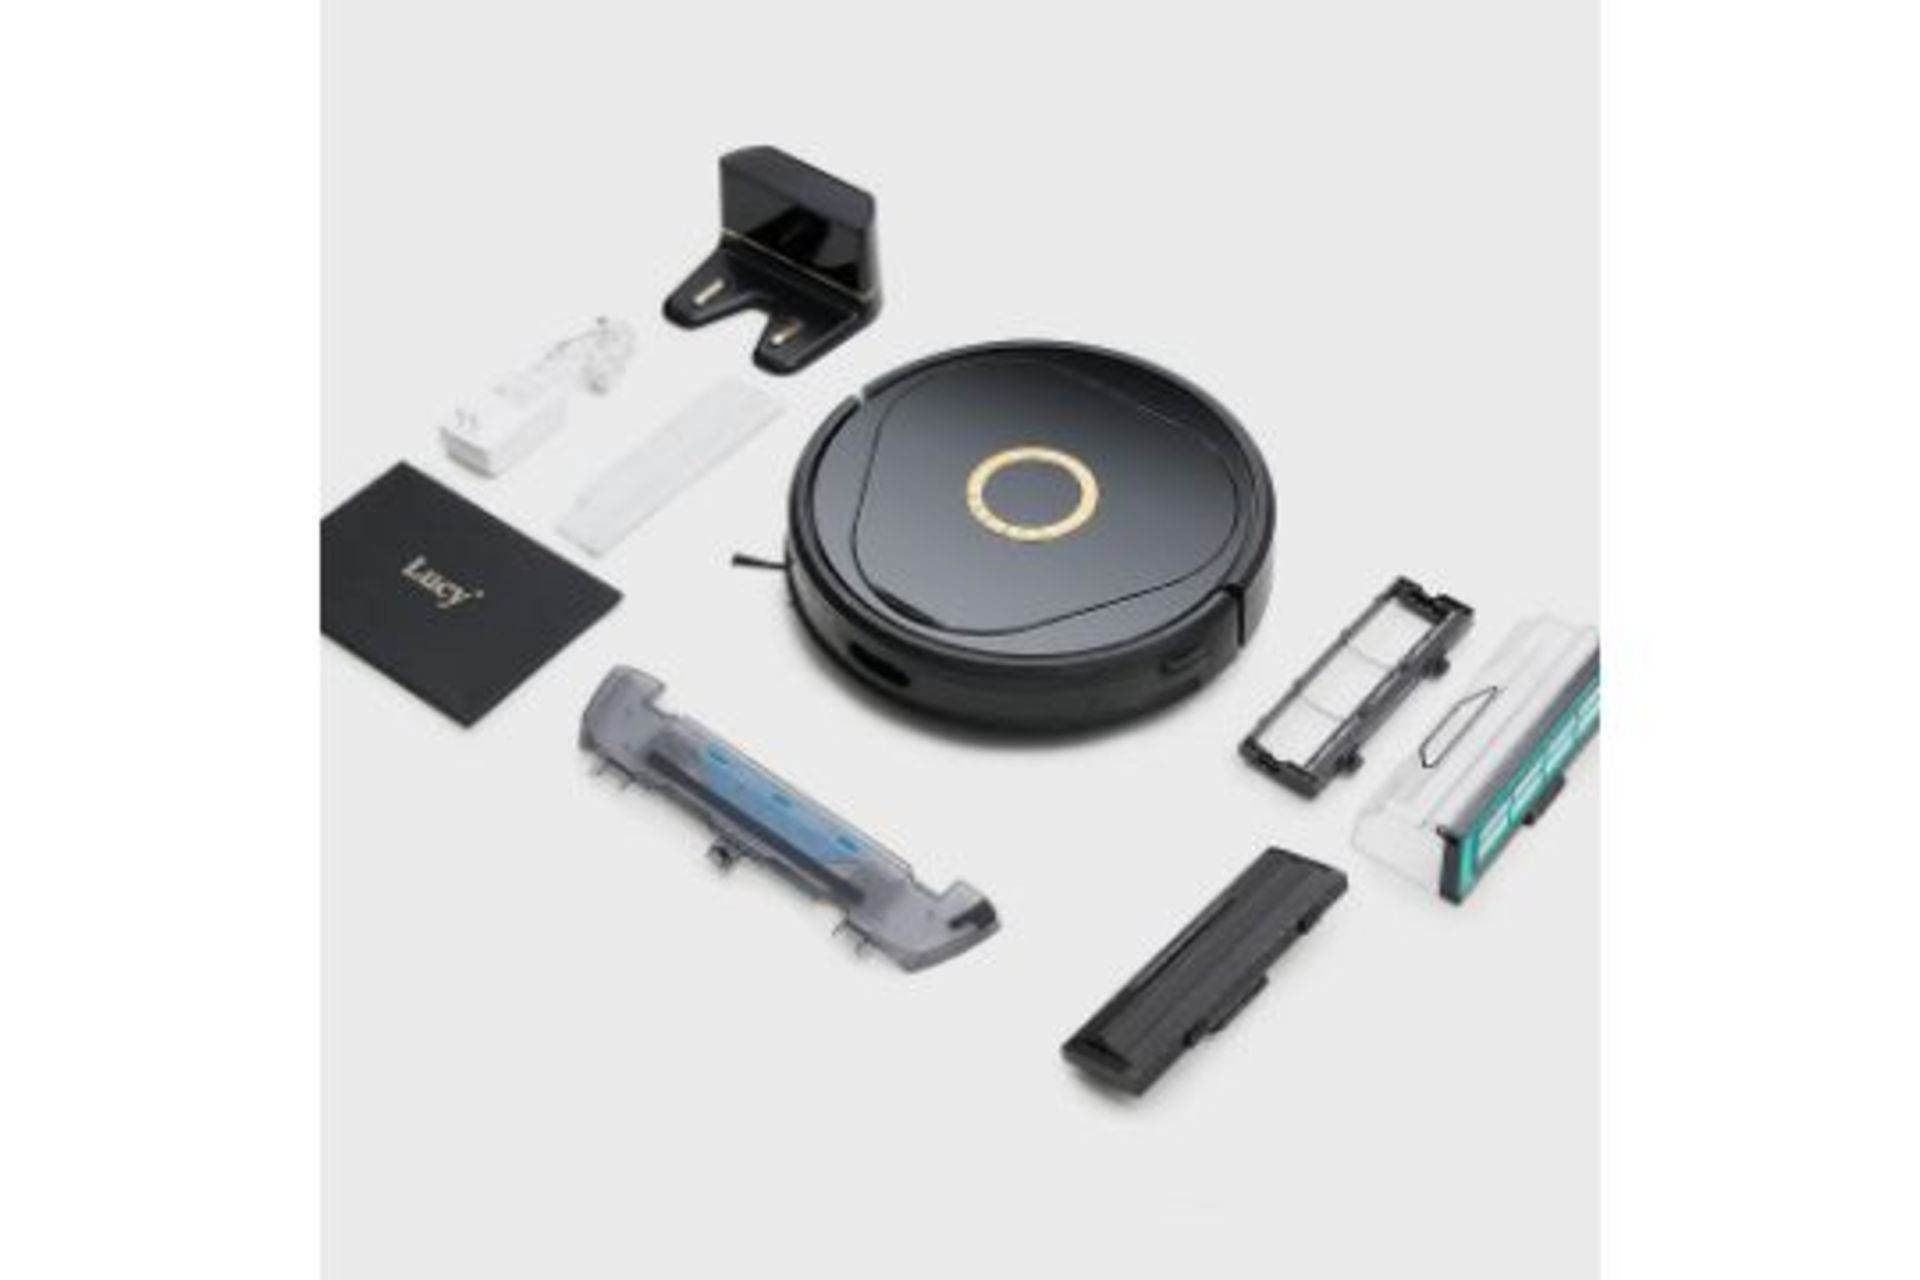 New & Boxed Robot Vacuum Cleaner Lucy with 3D-SLAM Navigation. RRP £369.99. 4000Pa Suction, No- - Image 3 of 7